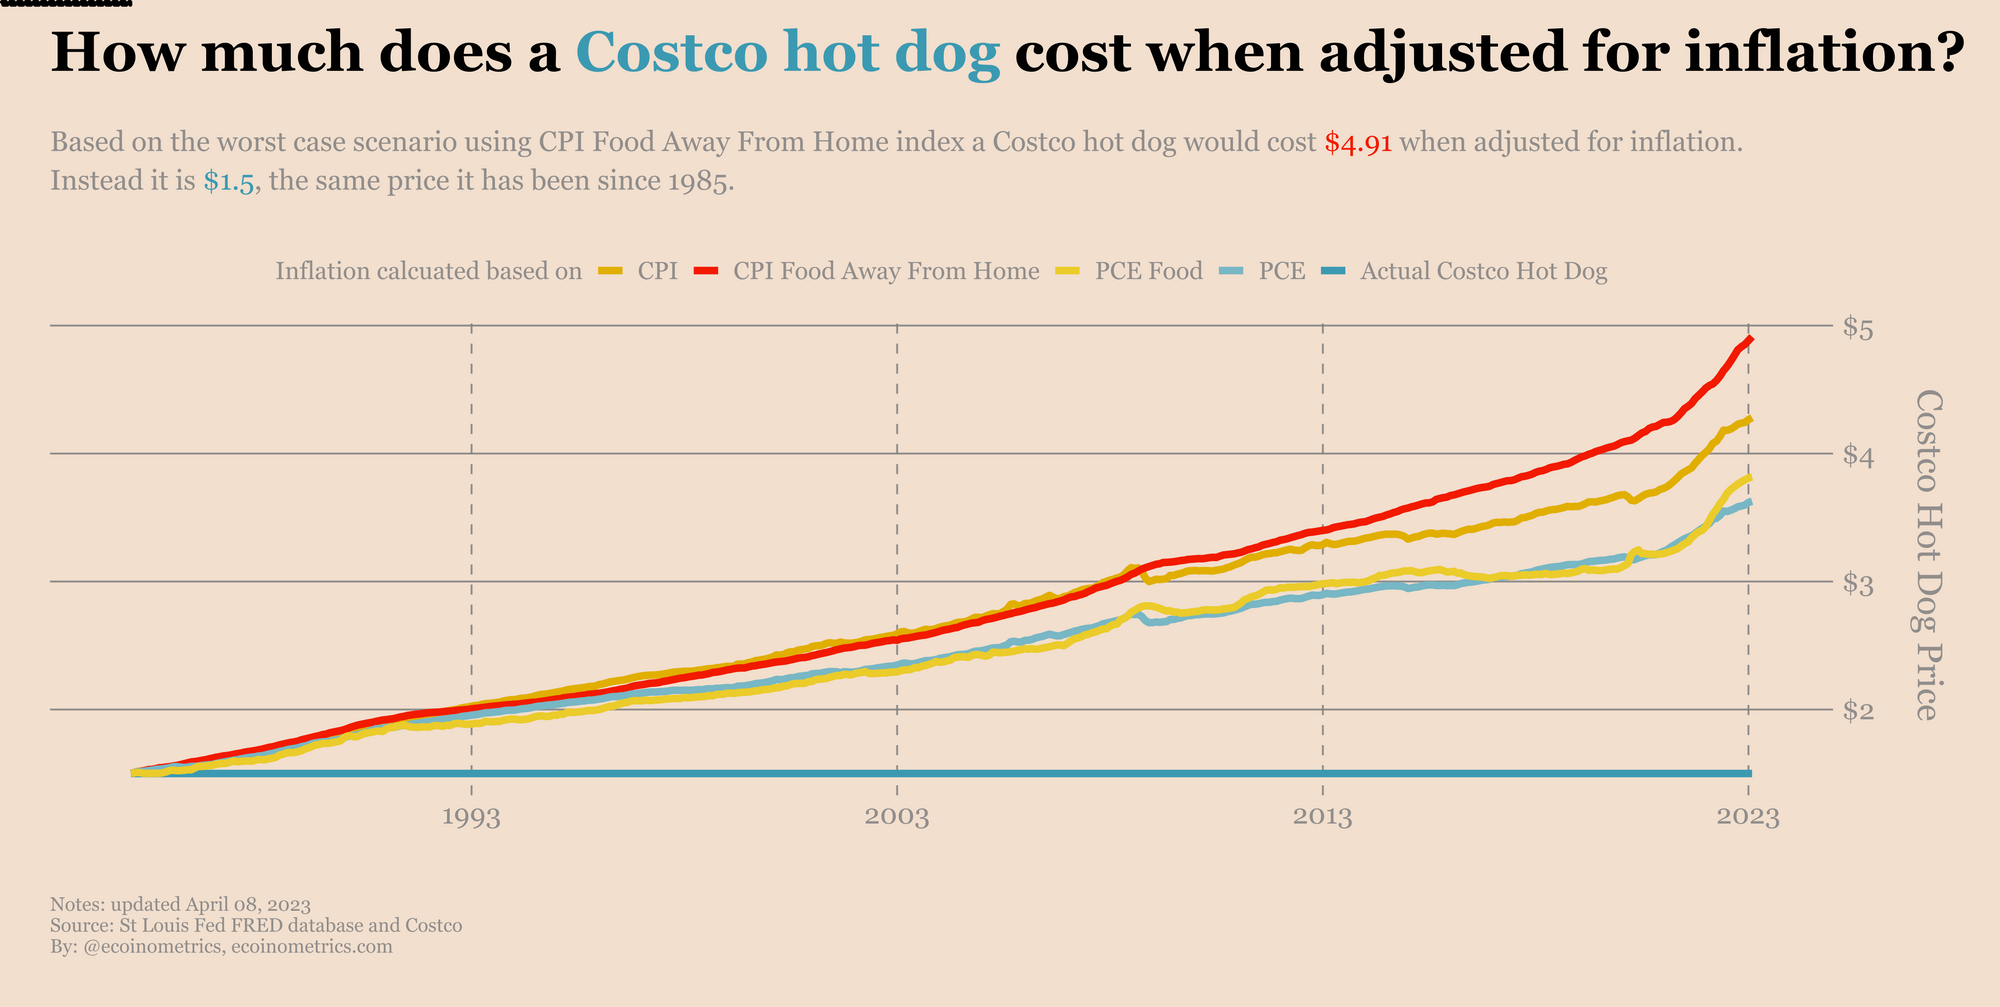 Price of a Costco hot dog under different inflation calculations.